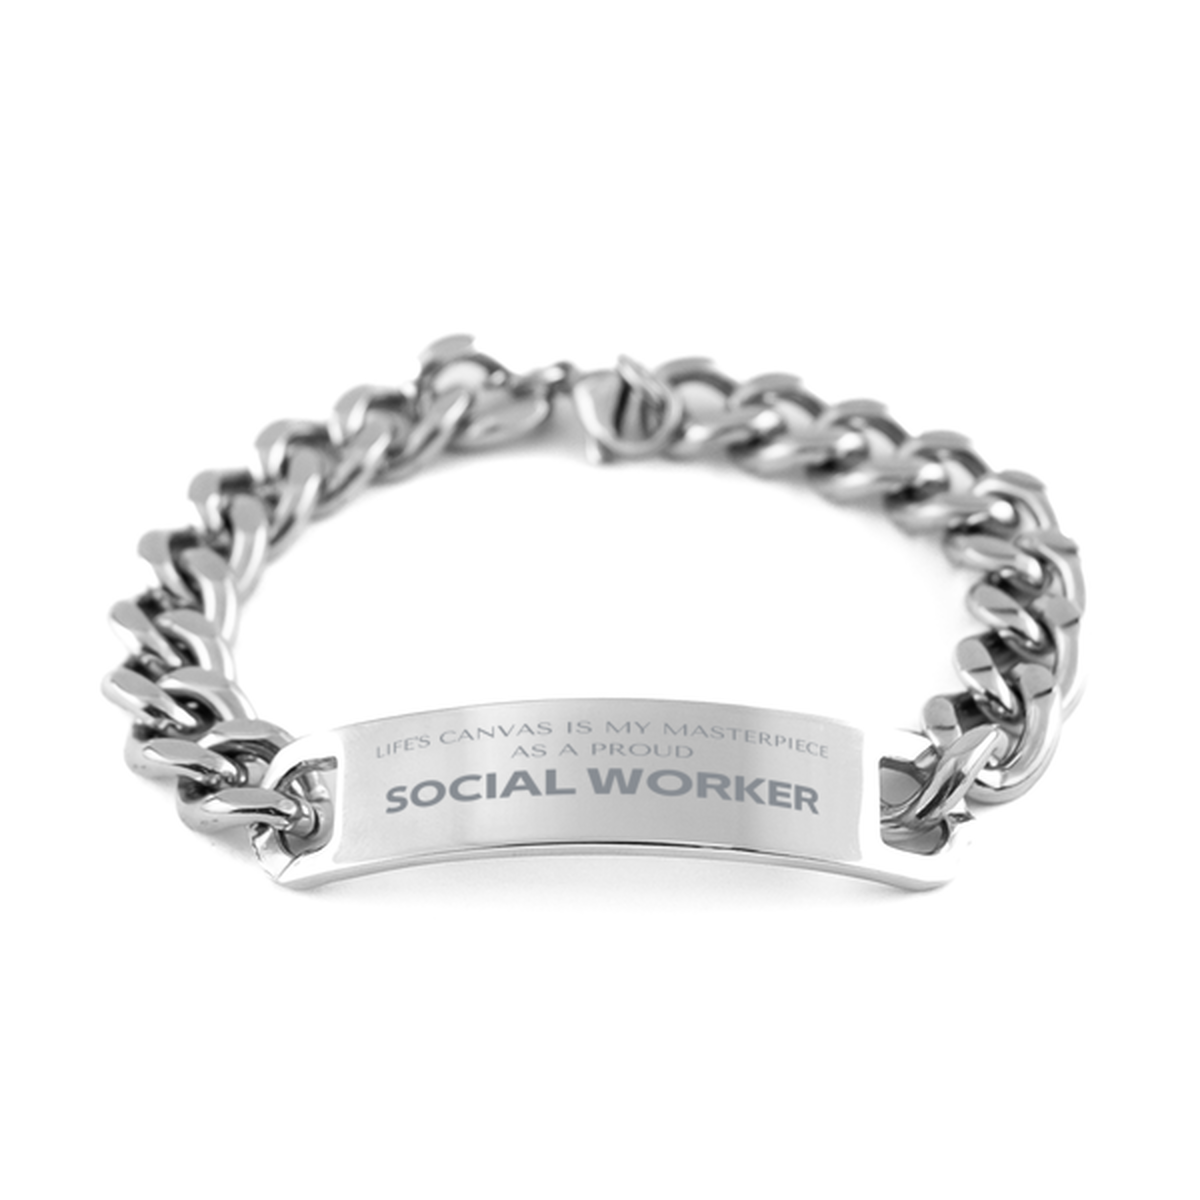 Proud Social Worker Gifts, Life's canvas is my masterpiece, Epic Birthday Christmas Unique Cuban Chain Stainless Steel Bracelet For Social Worker, Coworkers, Men, Women, Friends